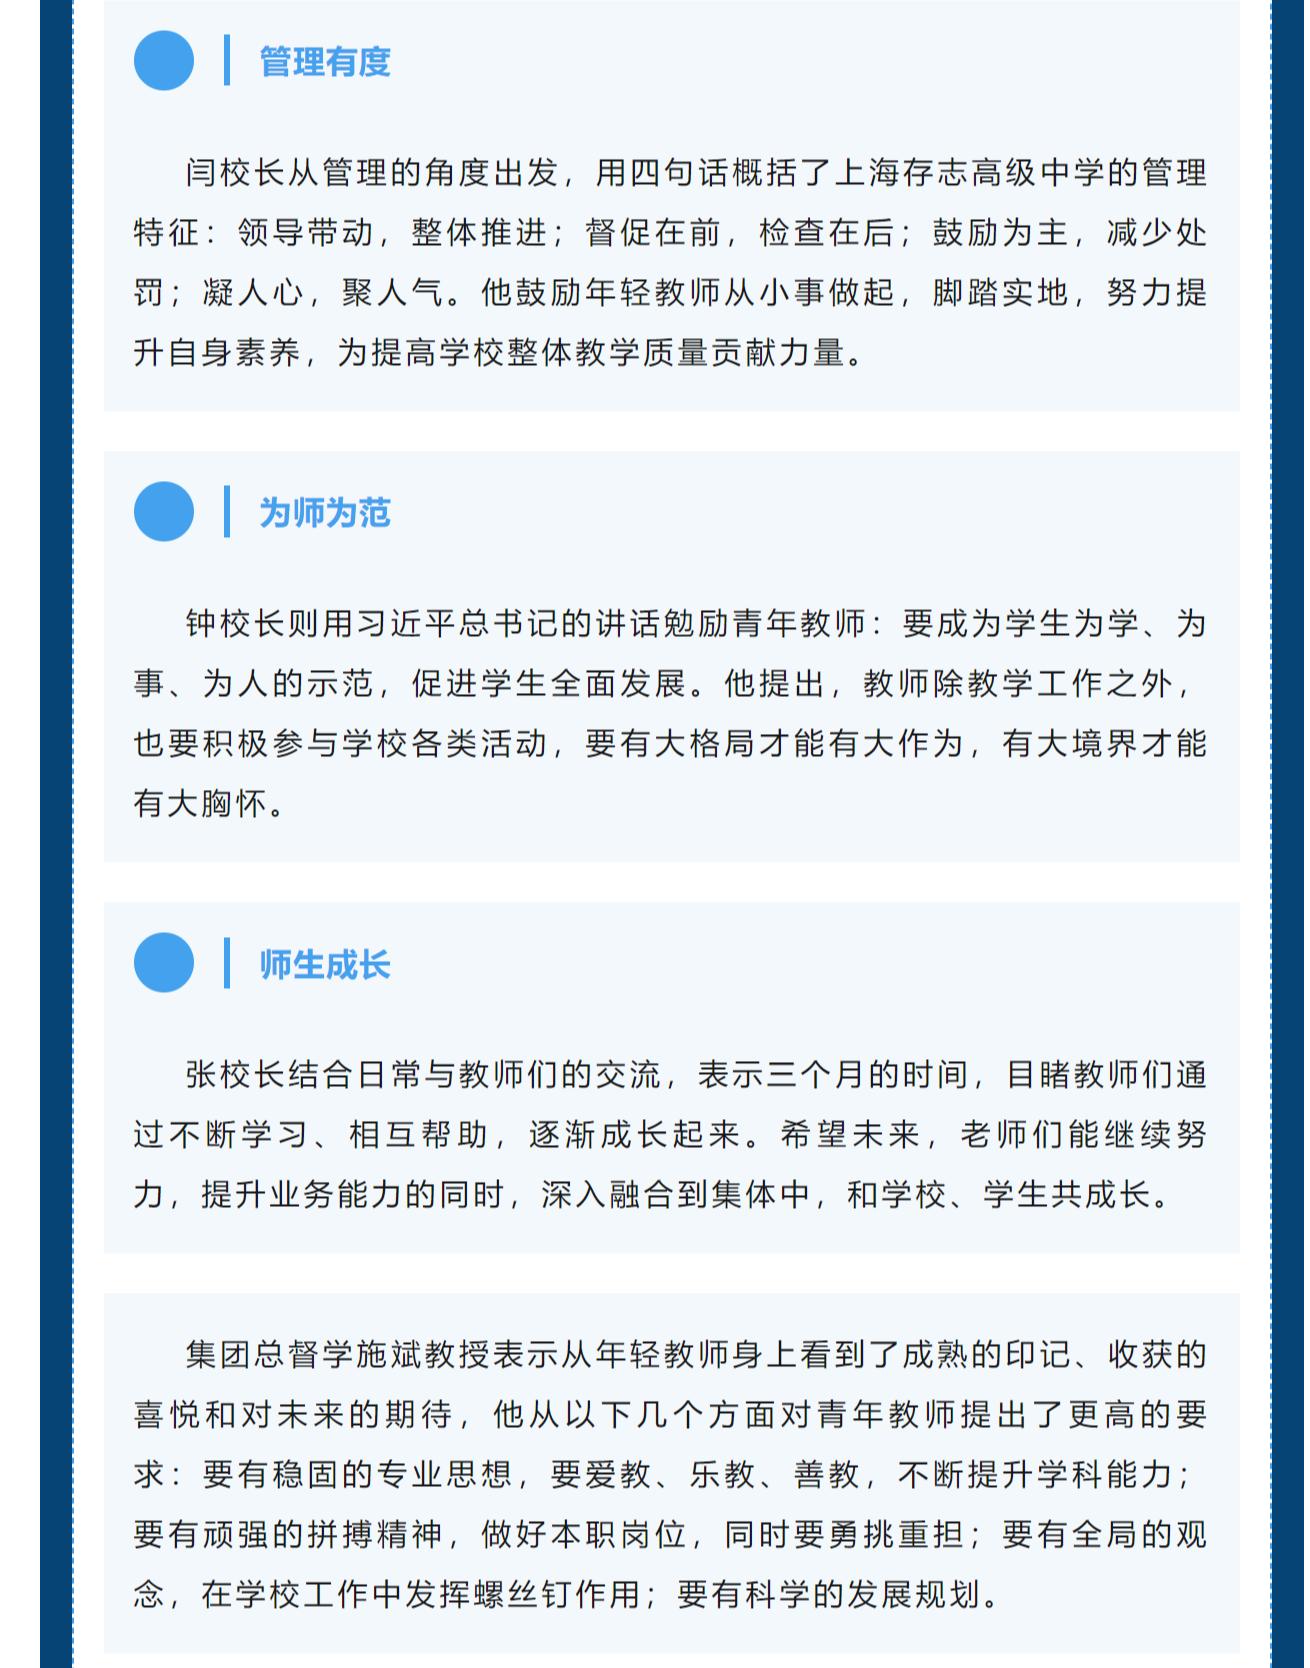 mp.weixin.qq.com_s__1FFxrXm7xnK0n0h9c7t8A - 副本 (4).png